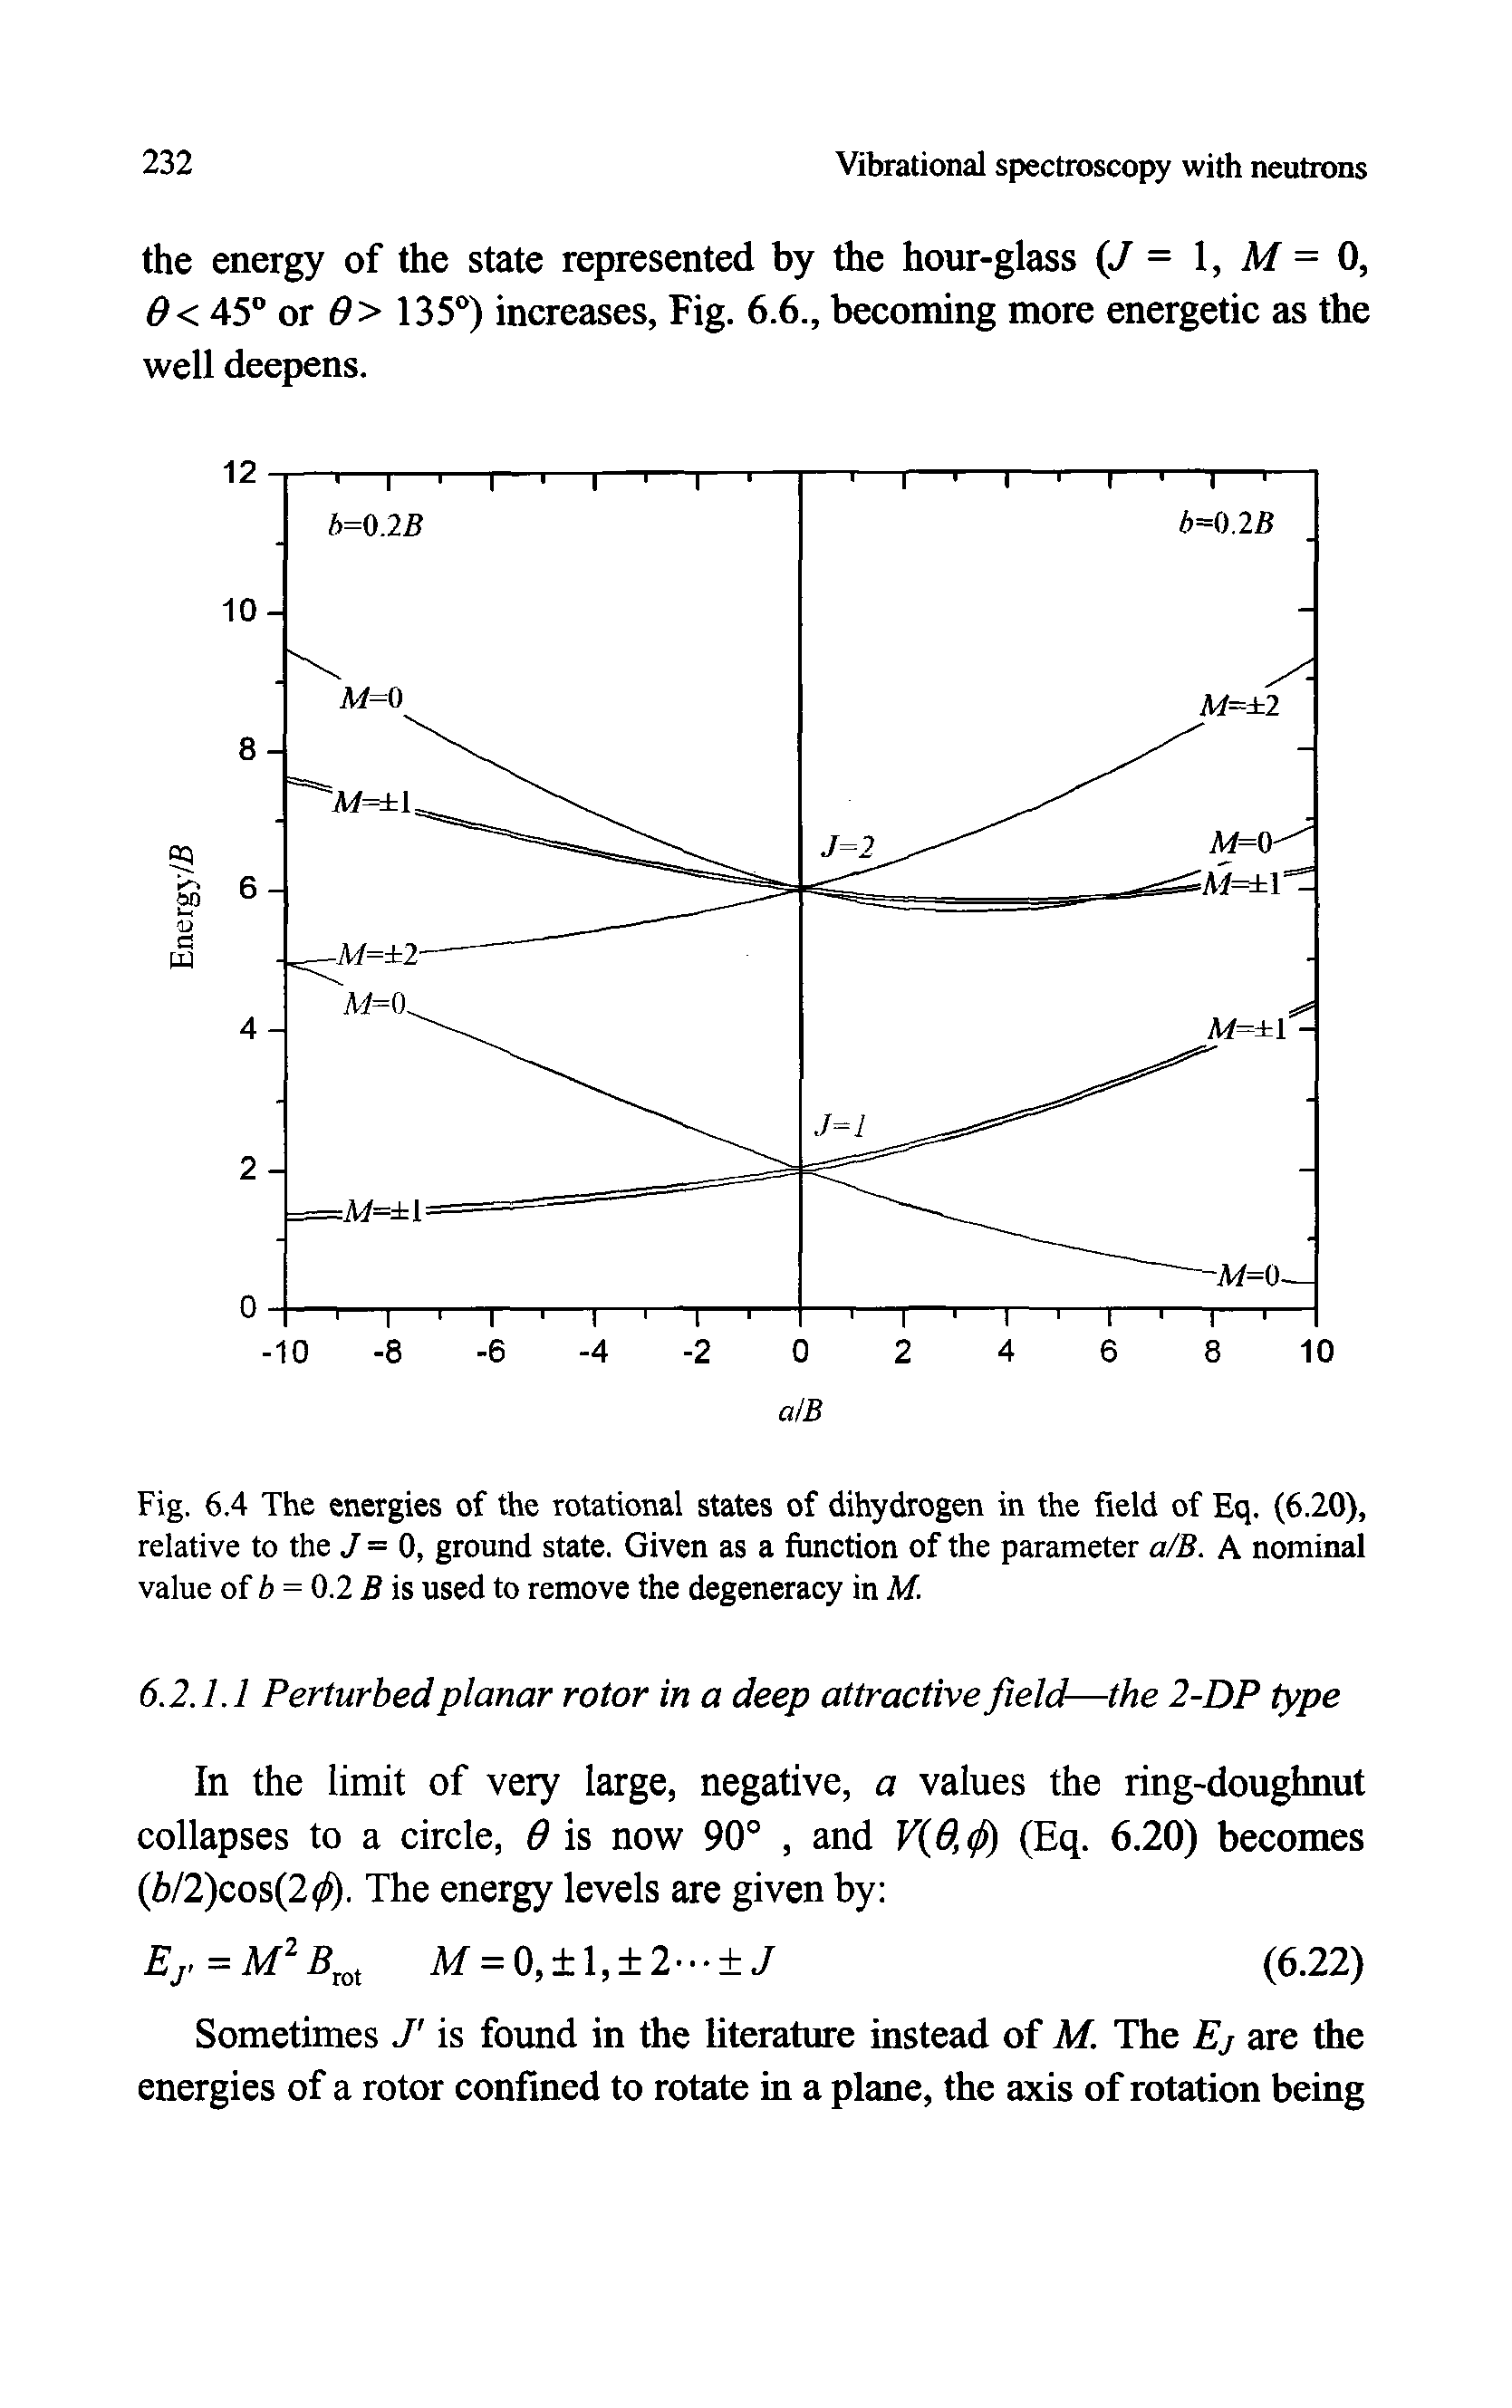 Fig. 6.4 The energies of the rotational states of dihydrogen in the field of Eq. (6.20), relative to the J = 0, ground state. Given as a function of the parameter a/B. A nominal value ofb = 0.2 B is used to remove the degeneracy in M.